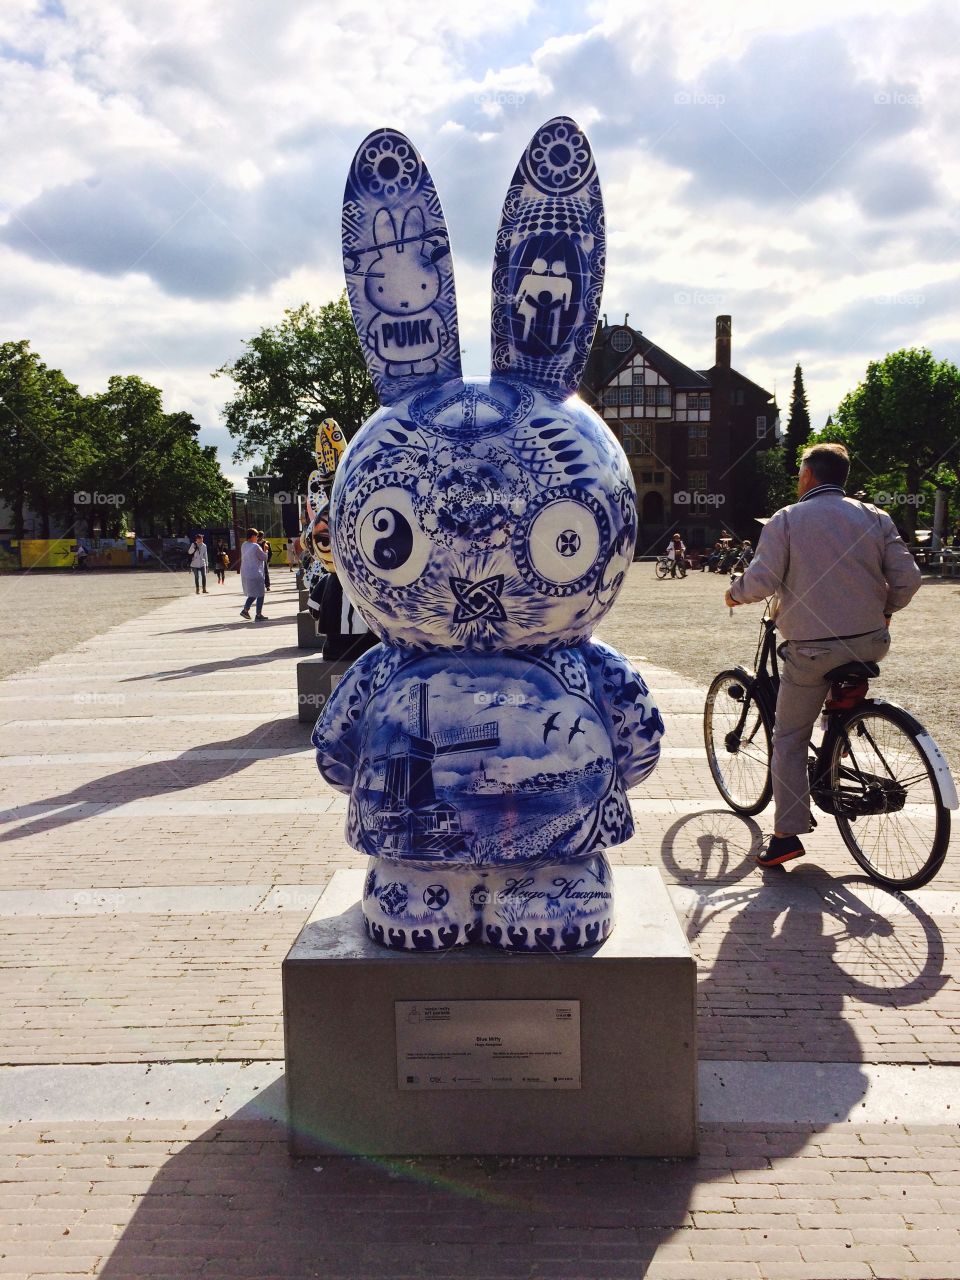 Miffy art contest . This is a Miffy art contest in Amsterdam with the design of delft. 